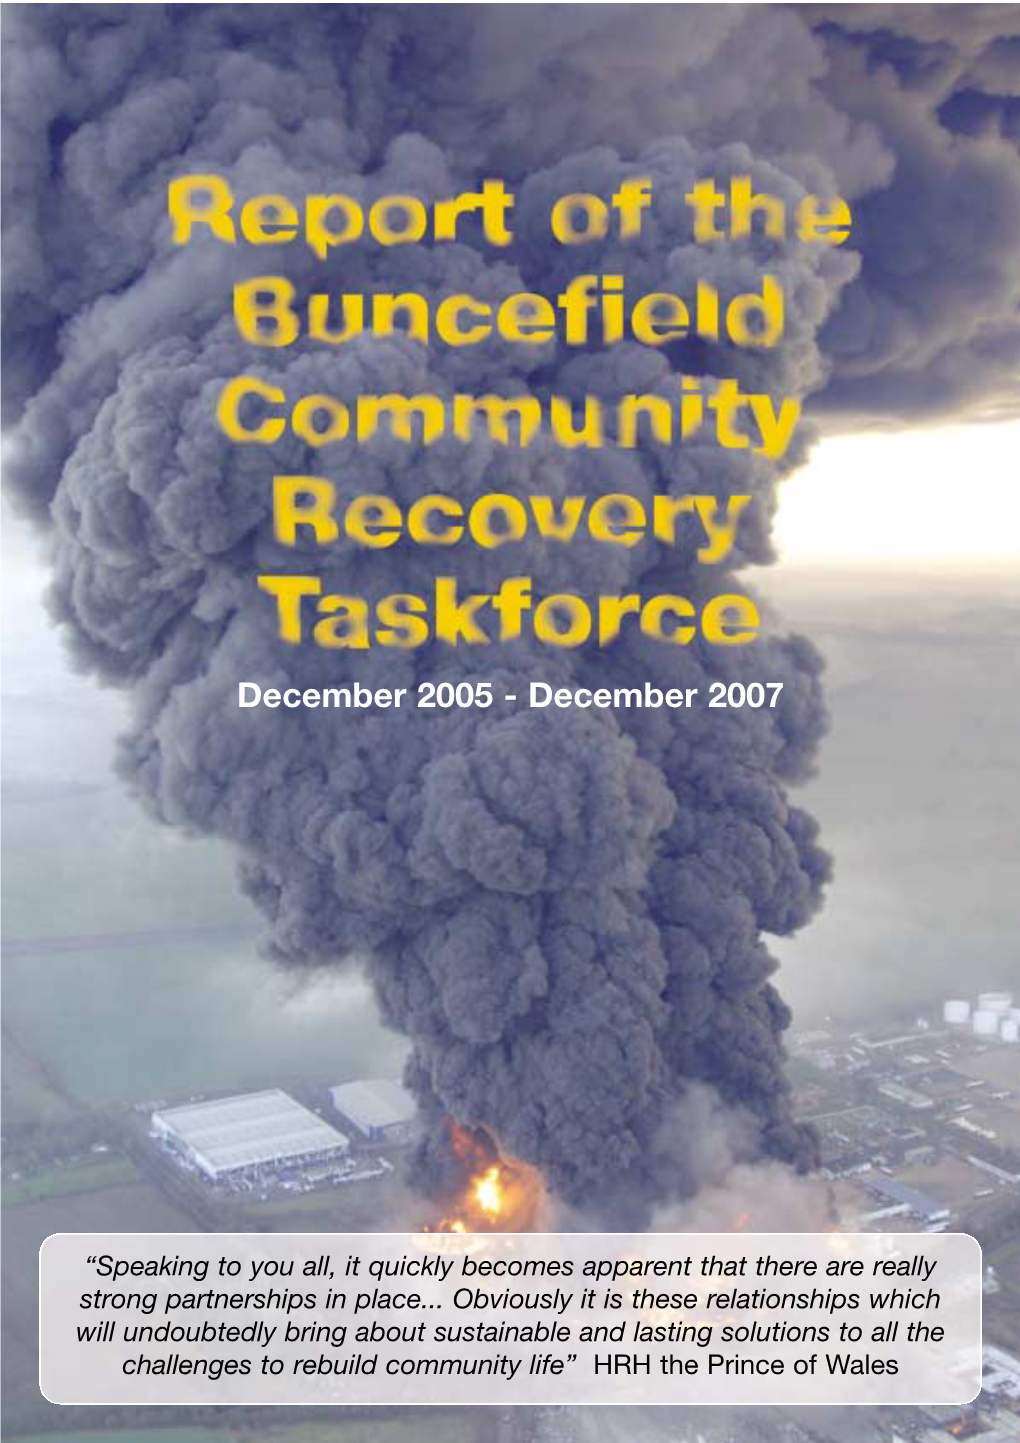 Report of the Buncefield Community Recovery Taskforce